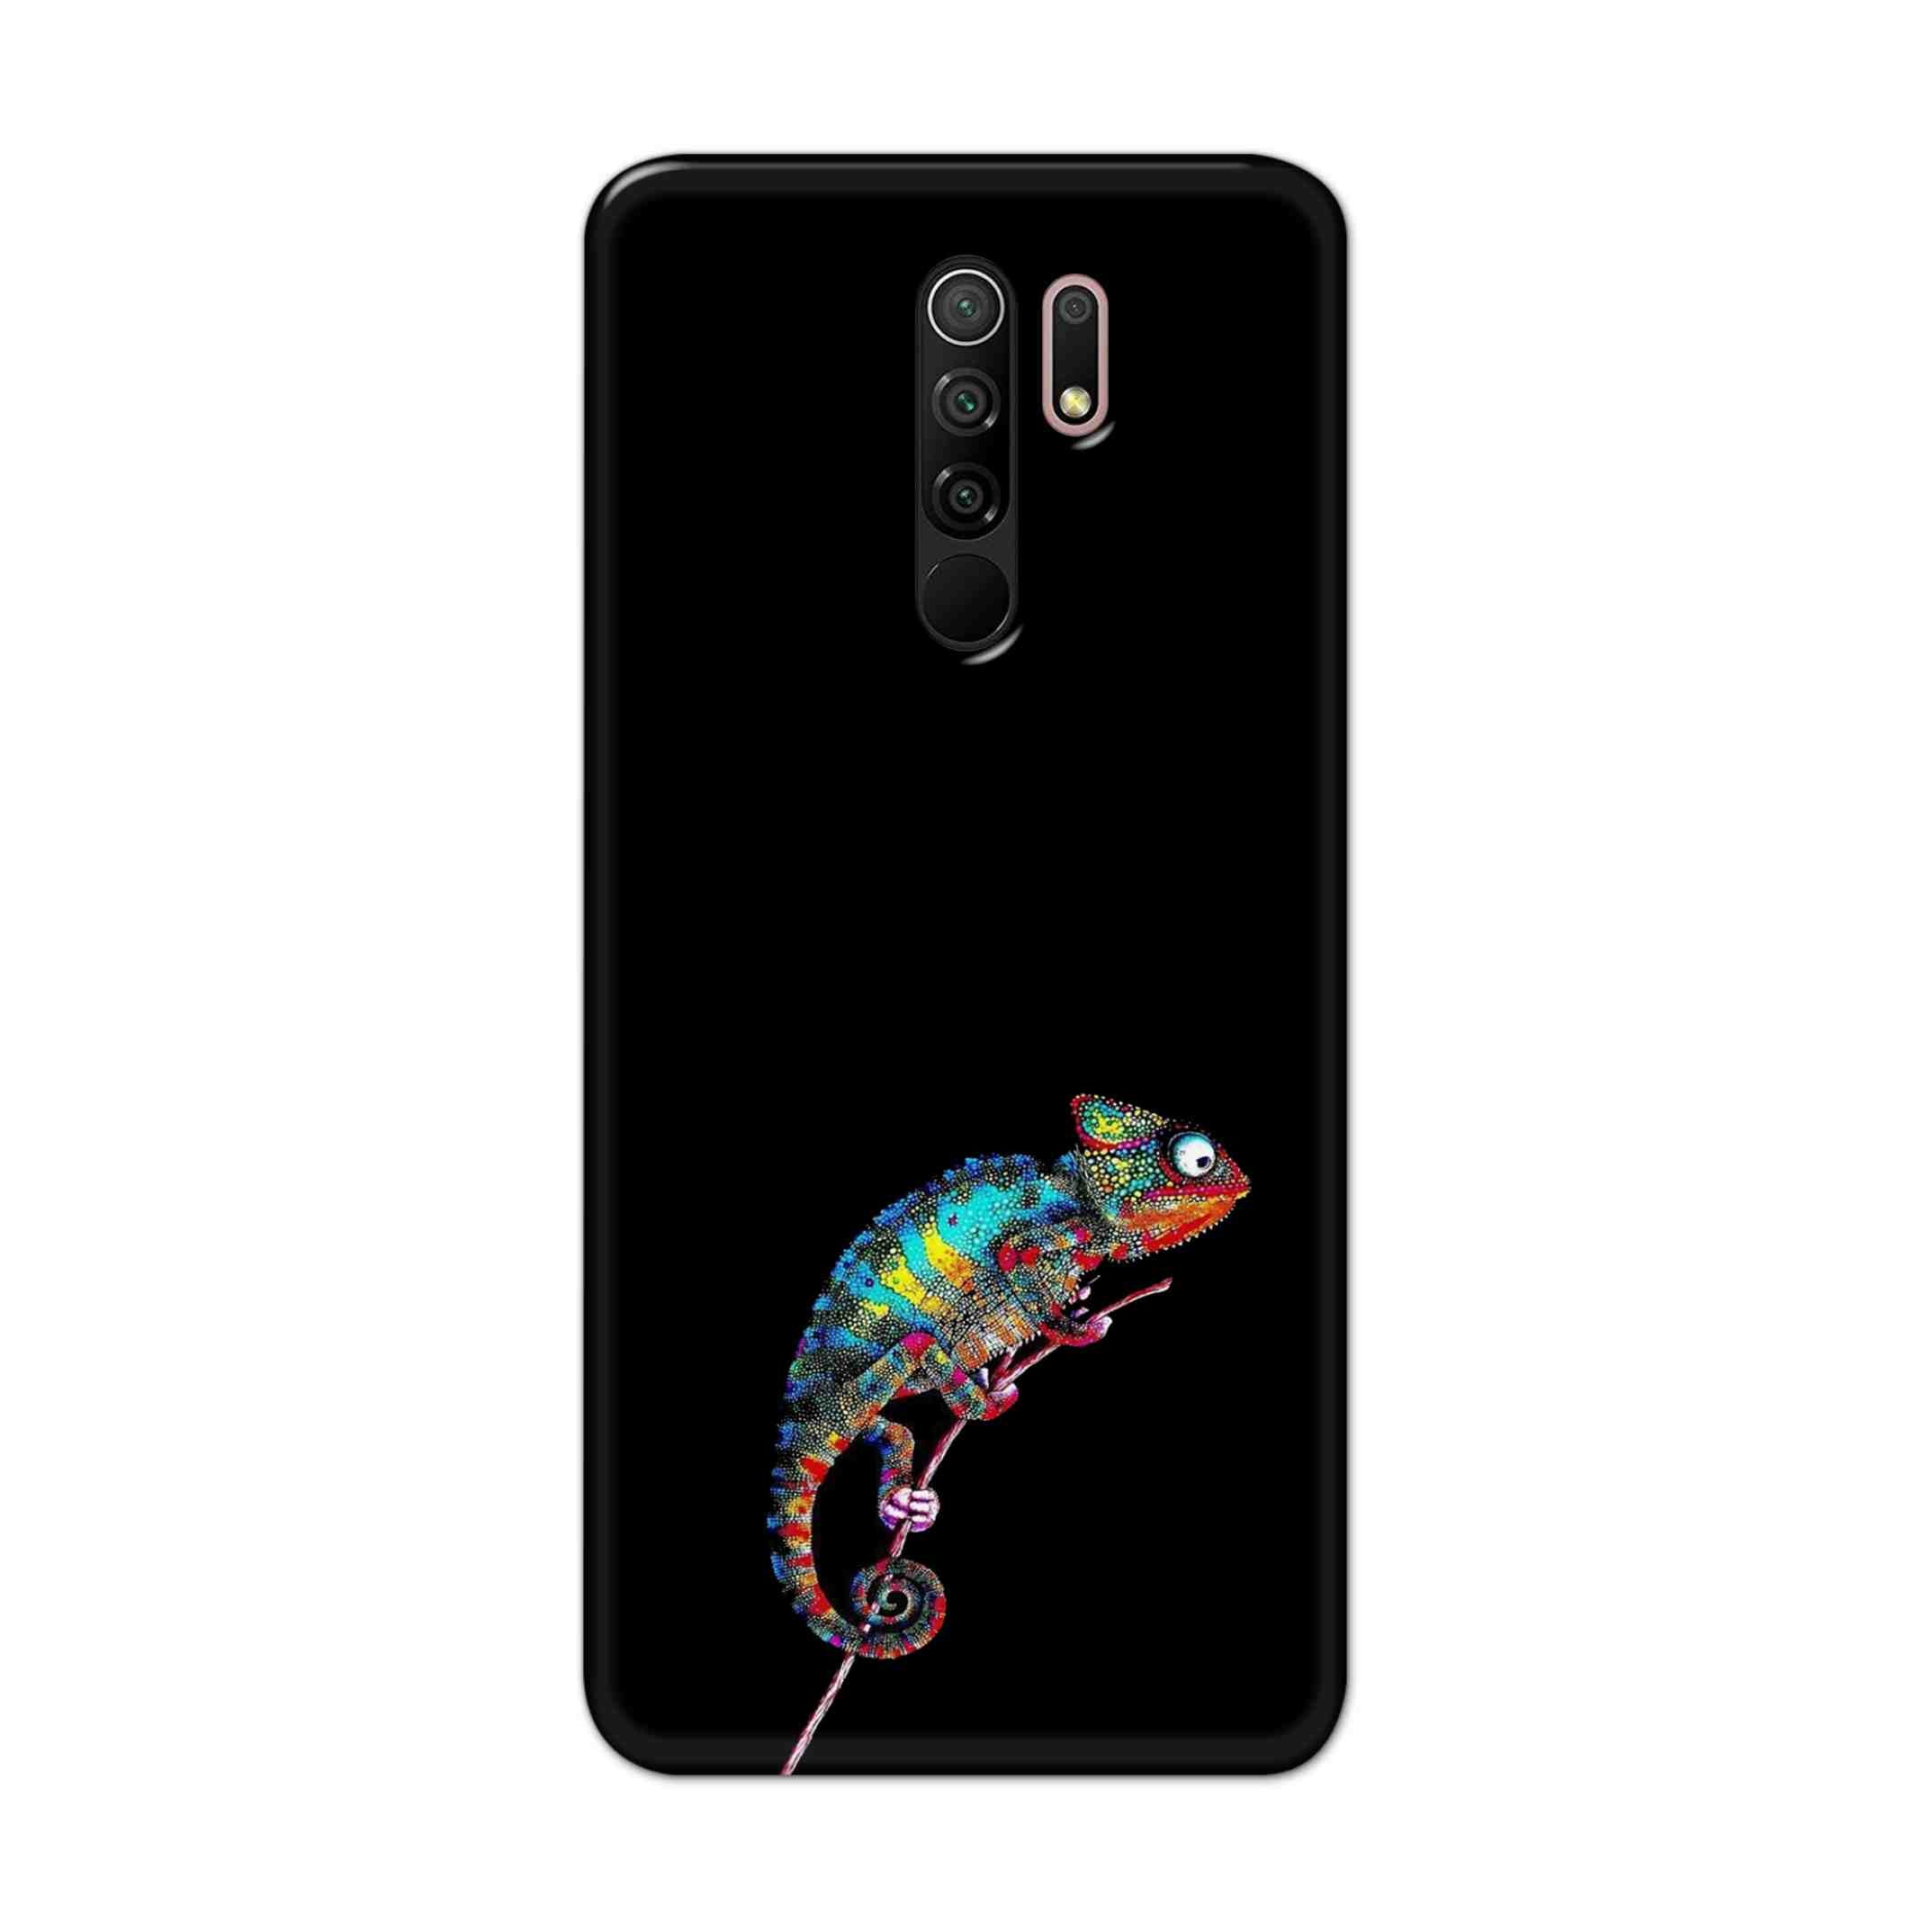 Buy Chamaeleon Hard Back Mobile Phone Case Cover For Xiaomi Redmi 9 Prime Online